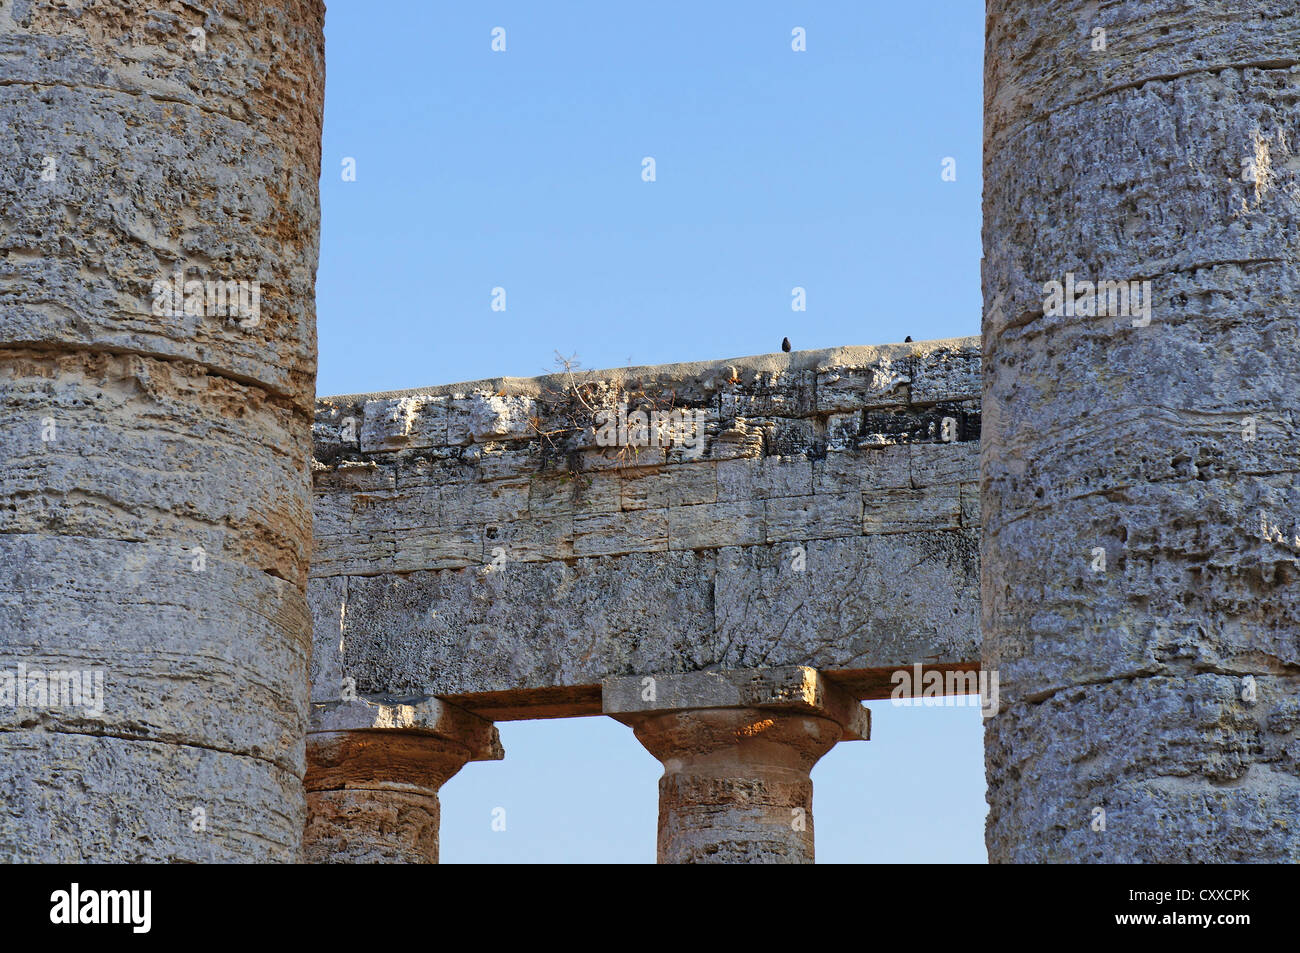 Birds on the trabeation of the greek temple of Segesta in Sicily Stock Photo